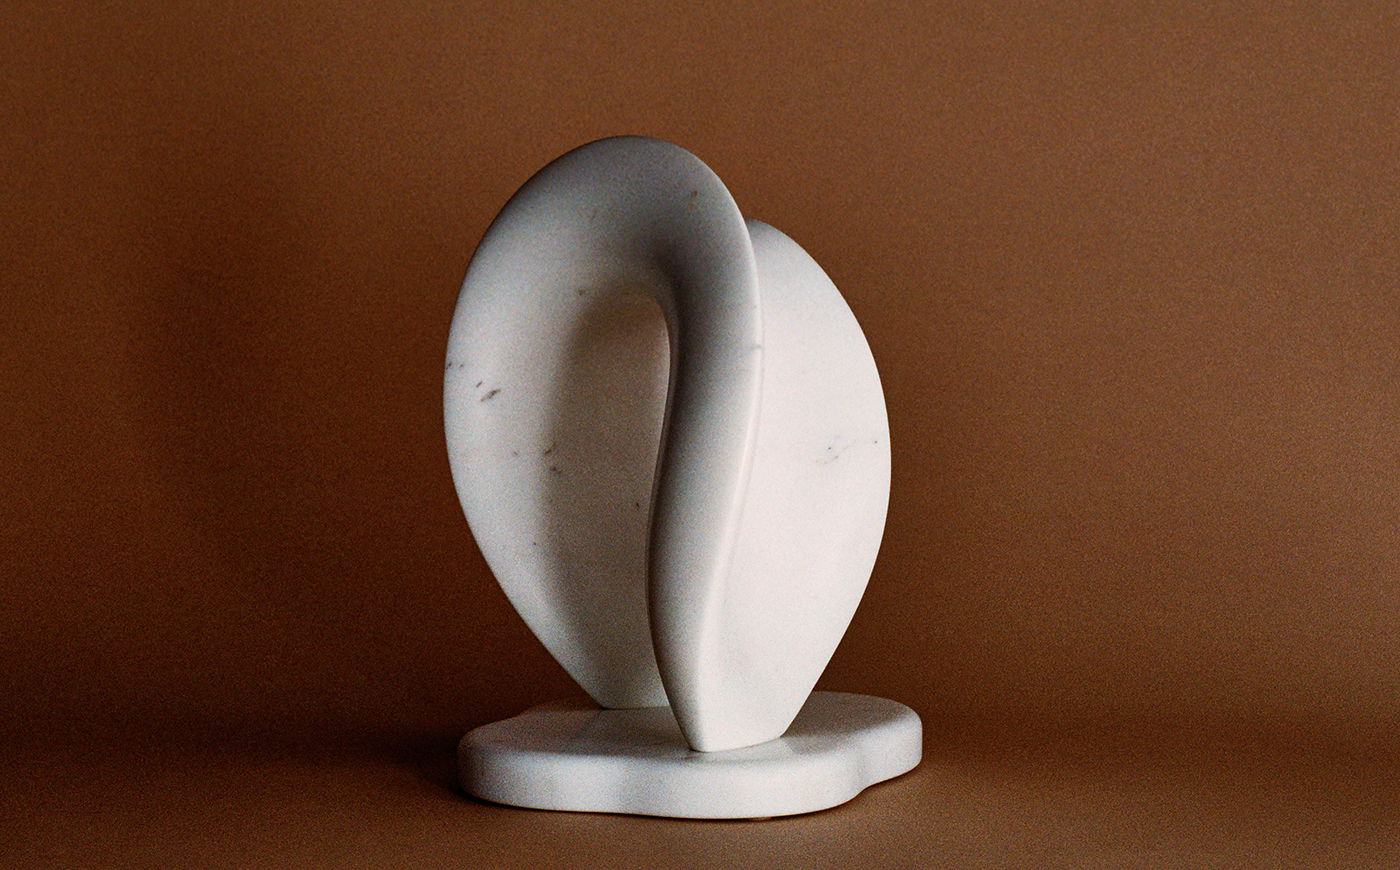 White Carrara Marble Sculpture, Hoku II, sits on a brown background